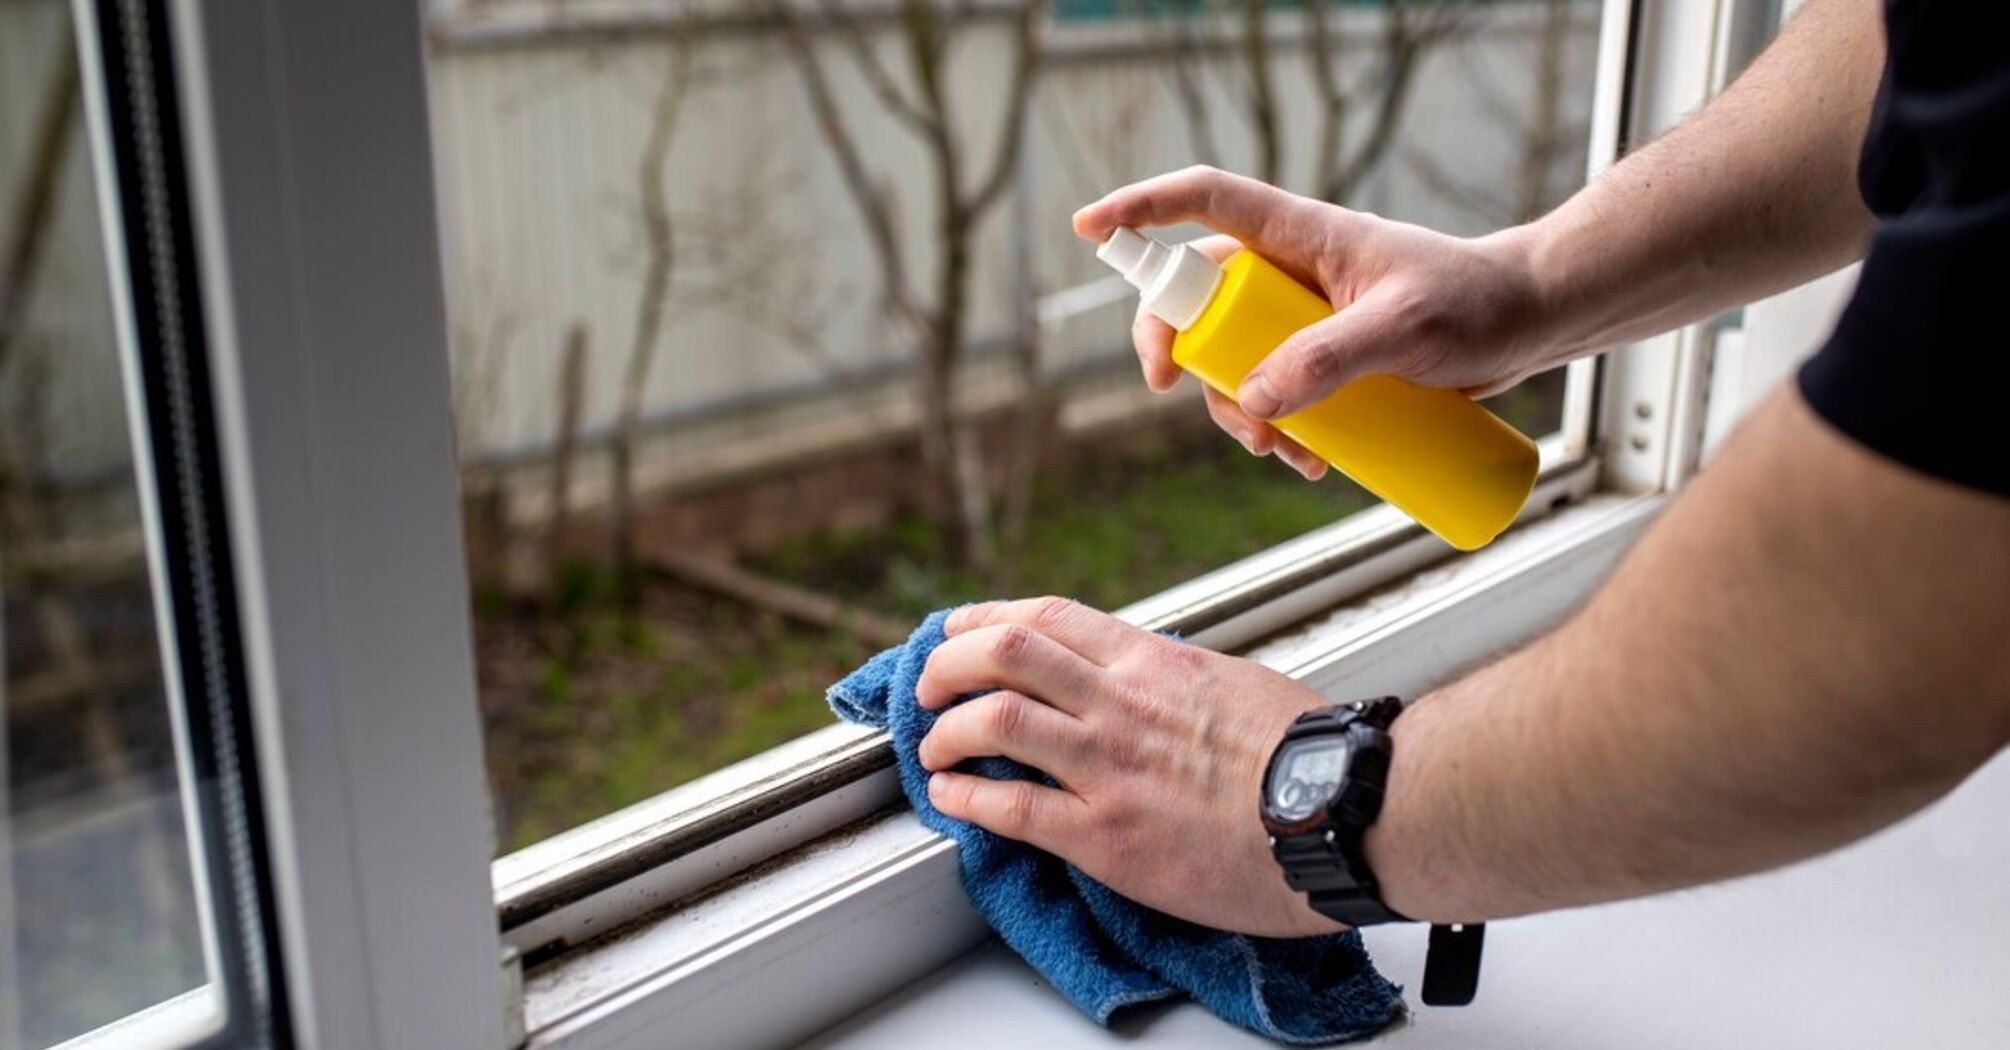 How to get rid of mold on windowsills and window ledges: 5 methods from experienced housewives